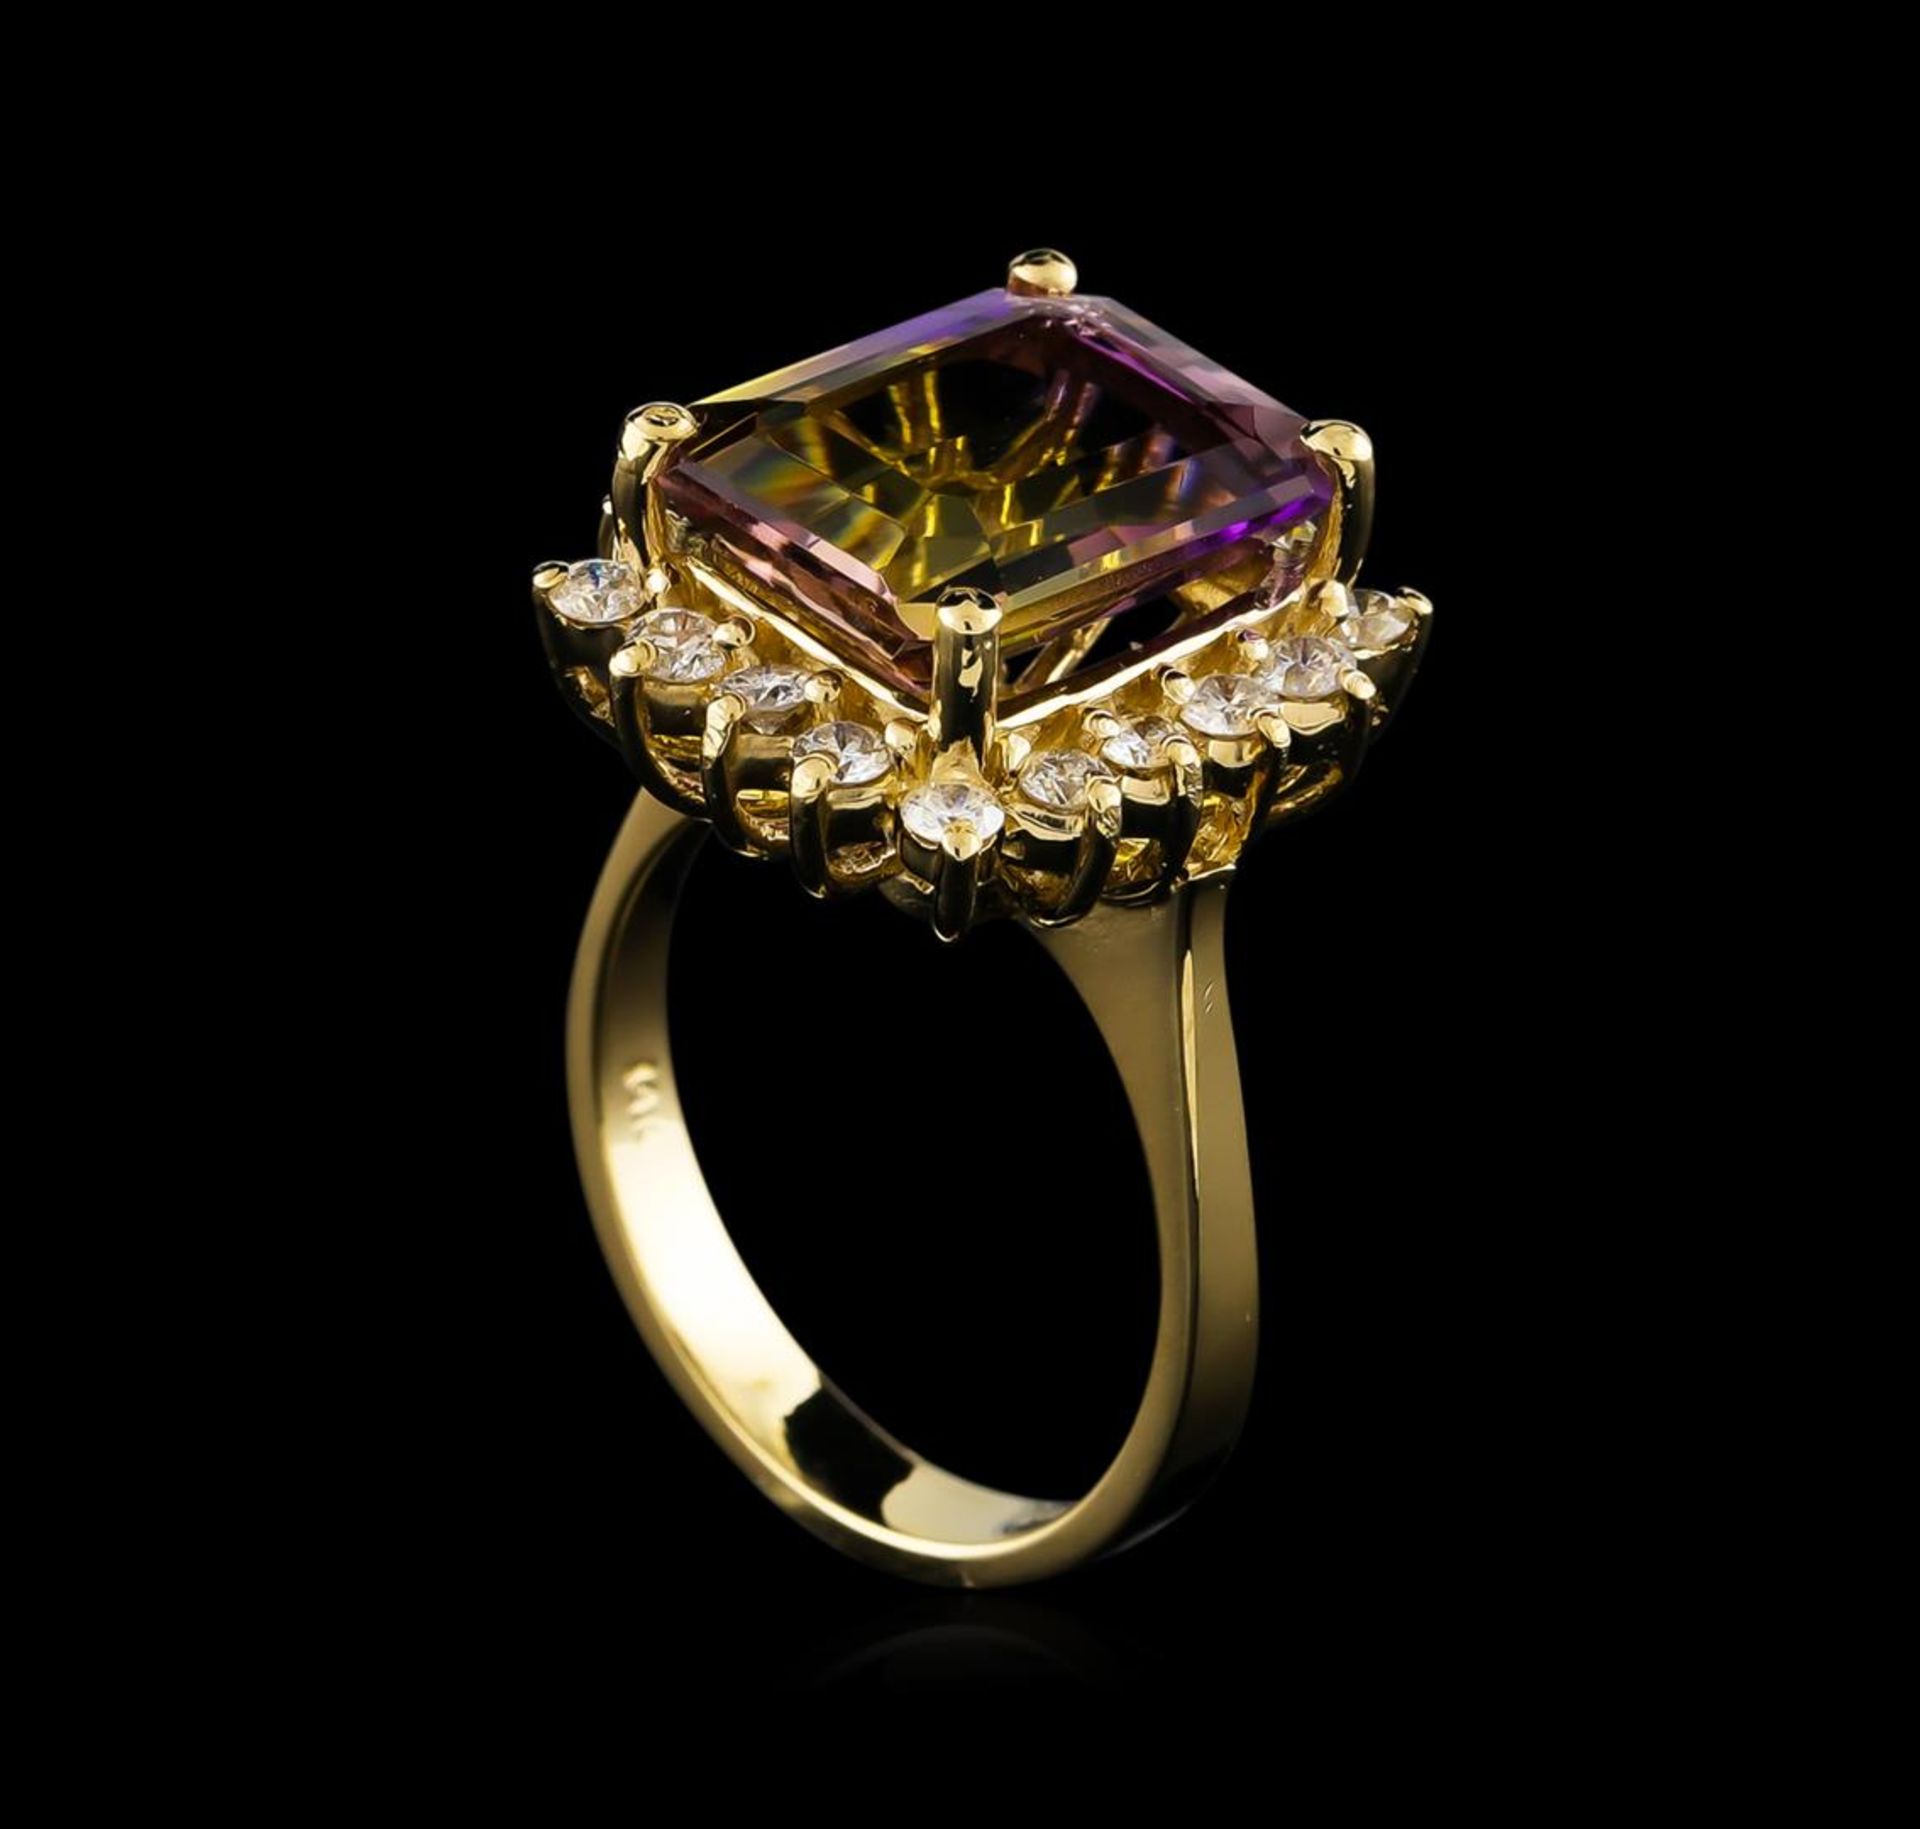 5.04 ctw Ametrine and Diamond Ring - 14KT Yellow Gold - Image 4 of 4